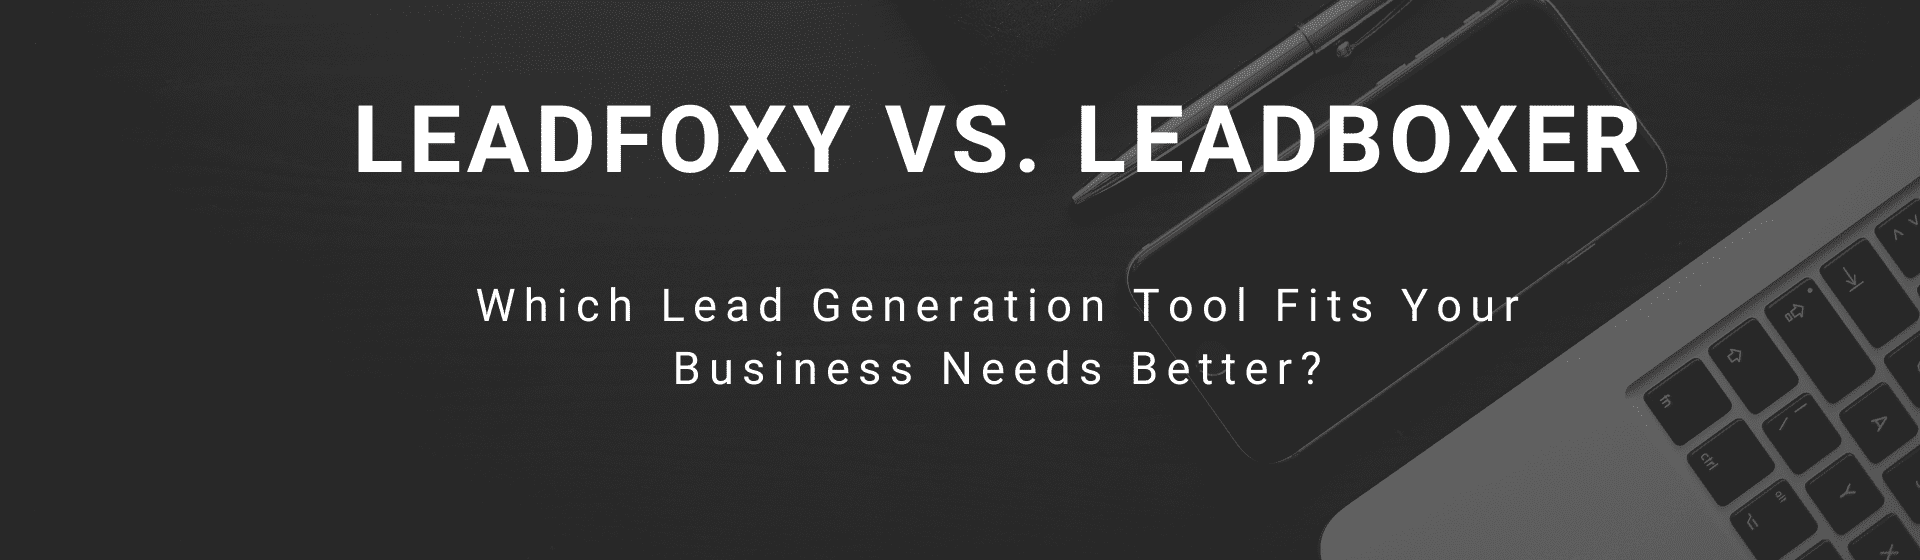 LeadFoxy Vs. LeadBoxer: Which Lead Generation Tool Fits Your Business Needs Better?